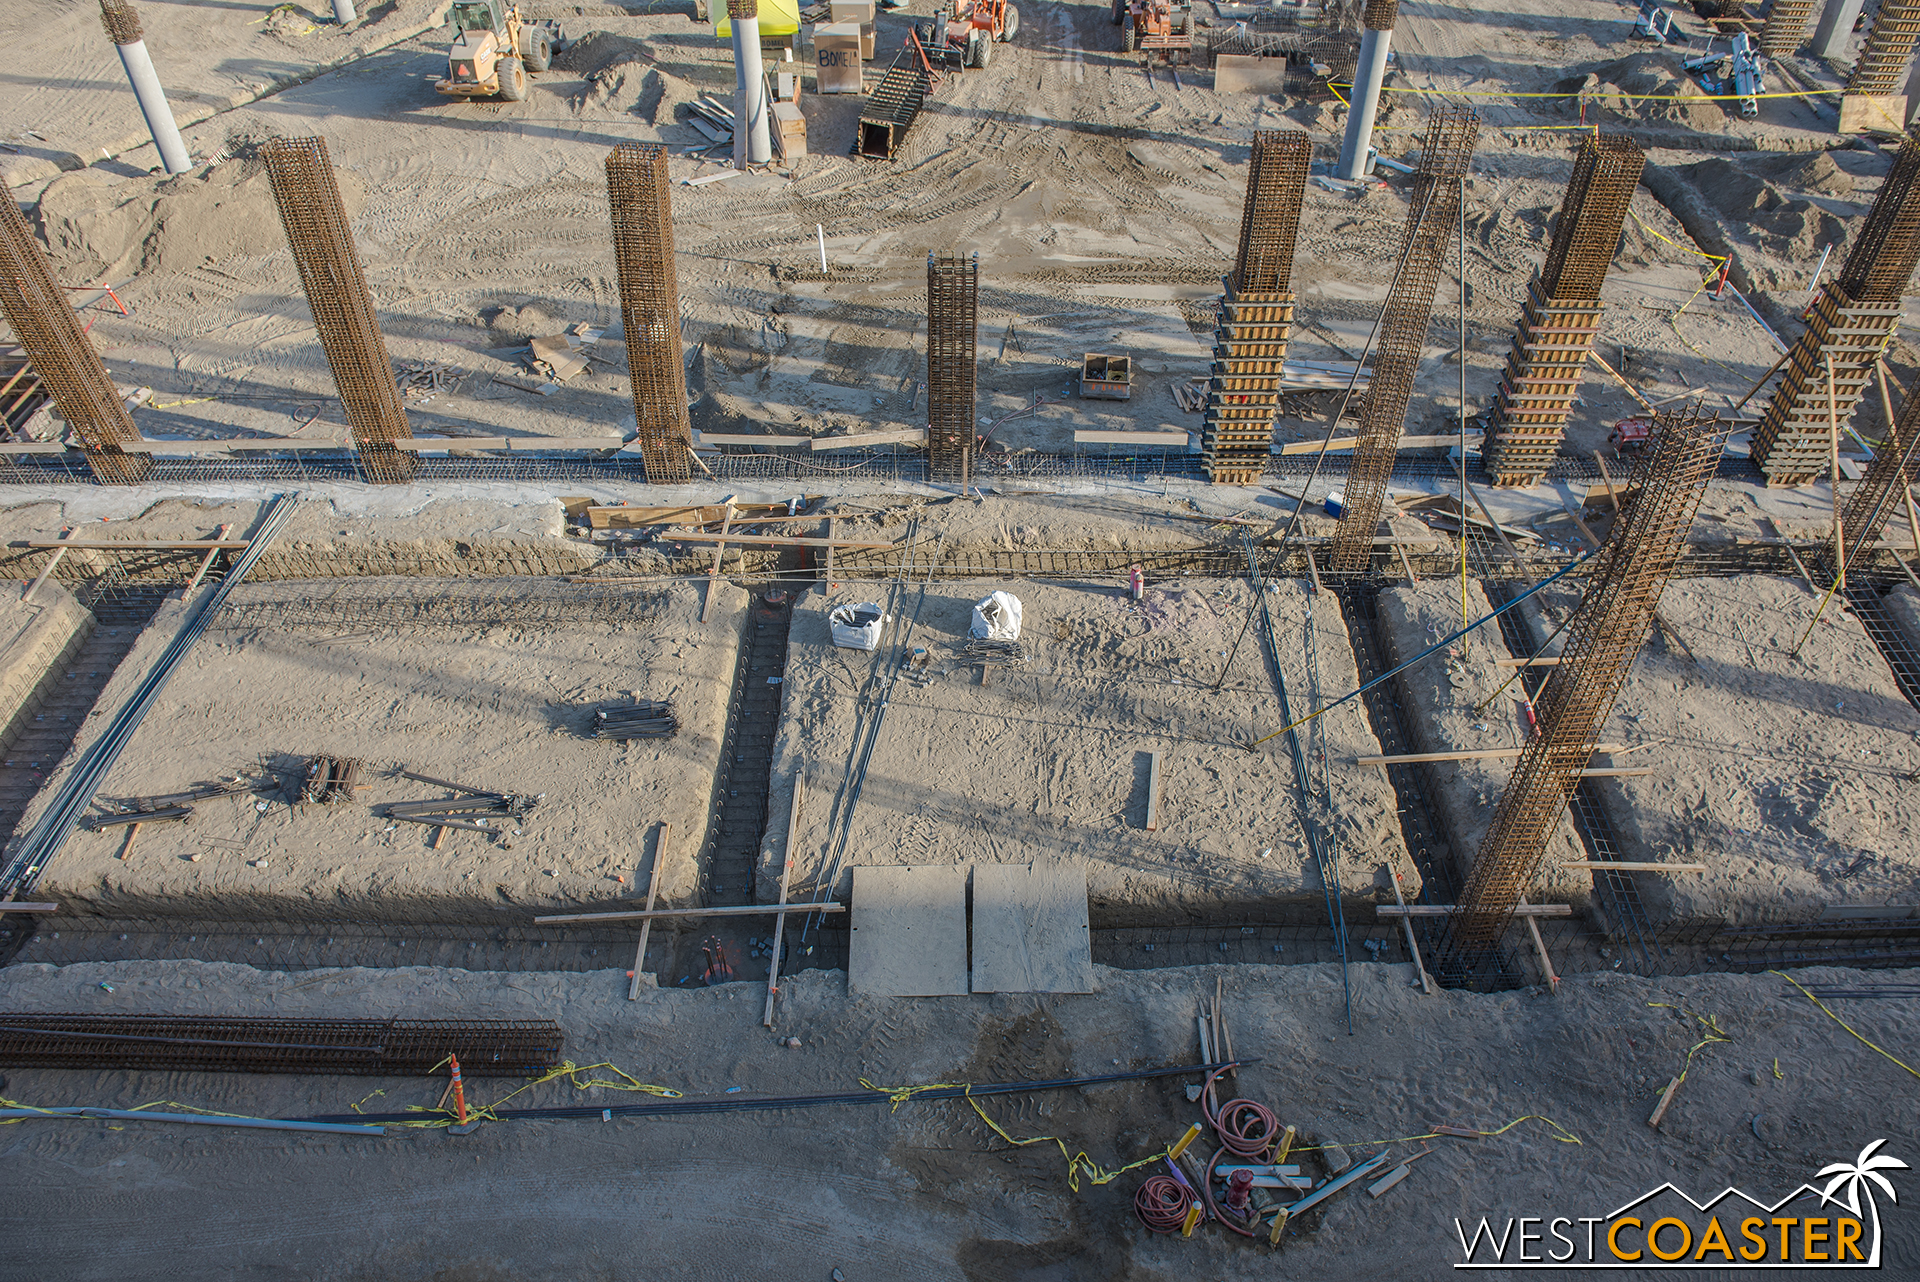  And they’re forming columns and installing rebar too. 